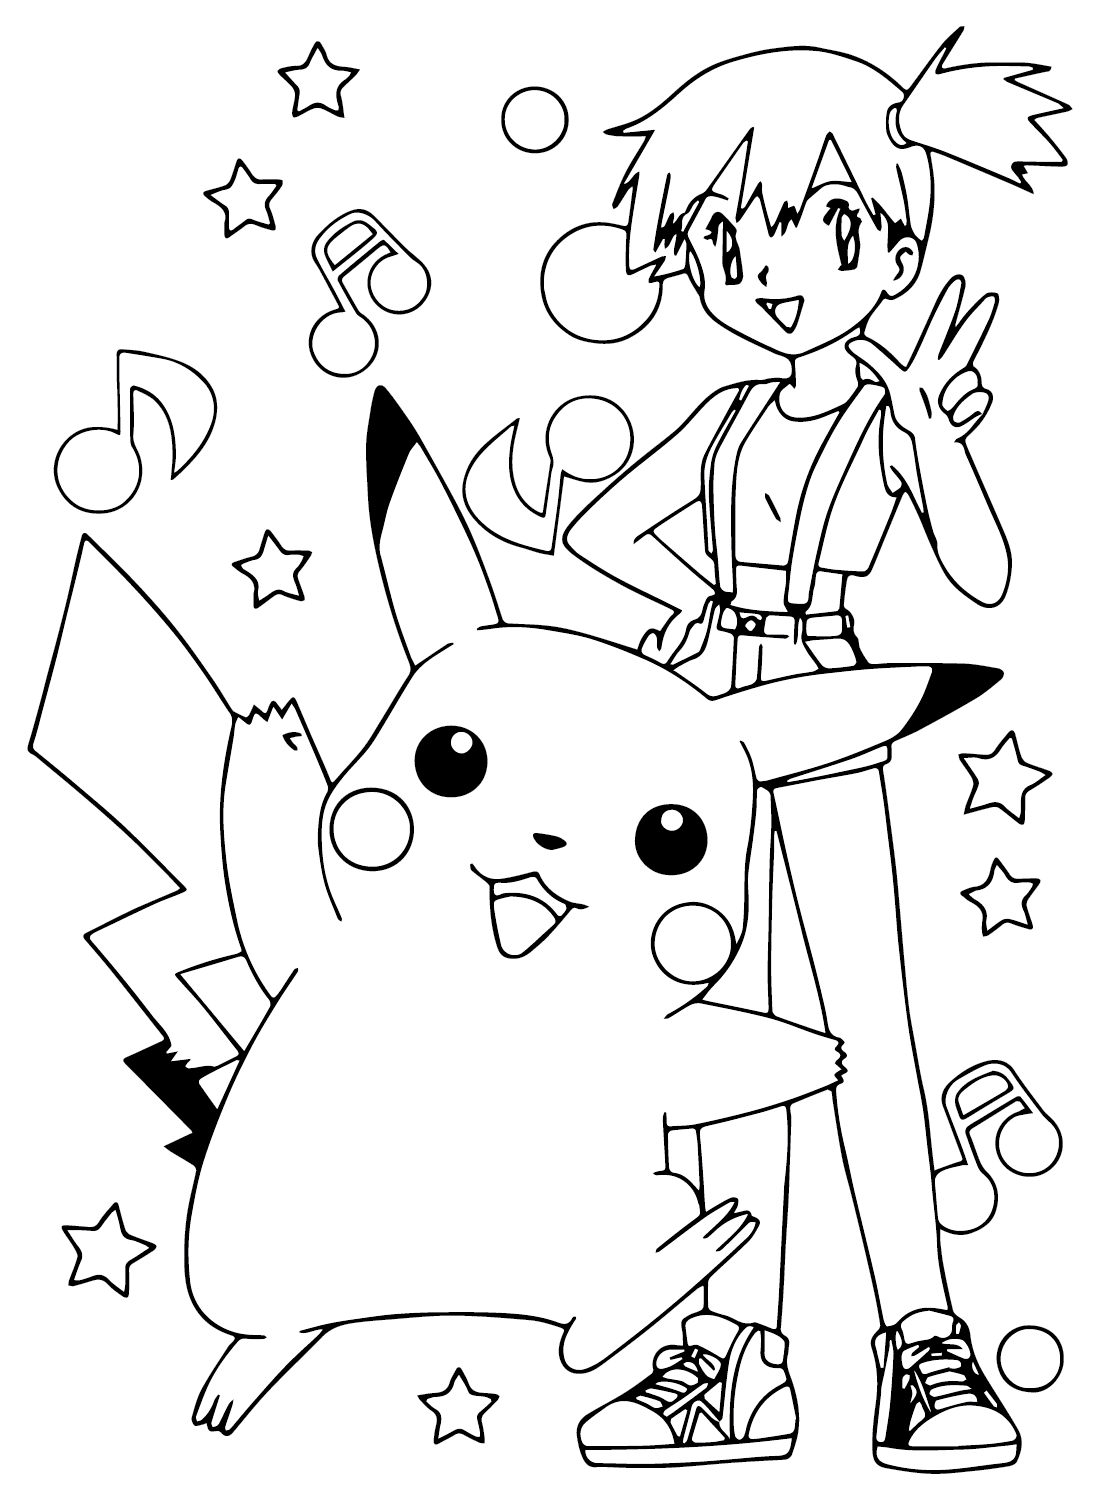 Misty with Pikachu Coloring Page from Misty